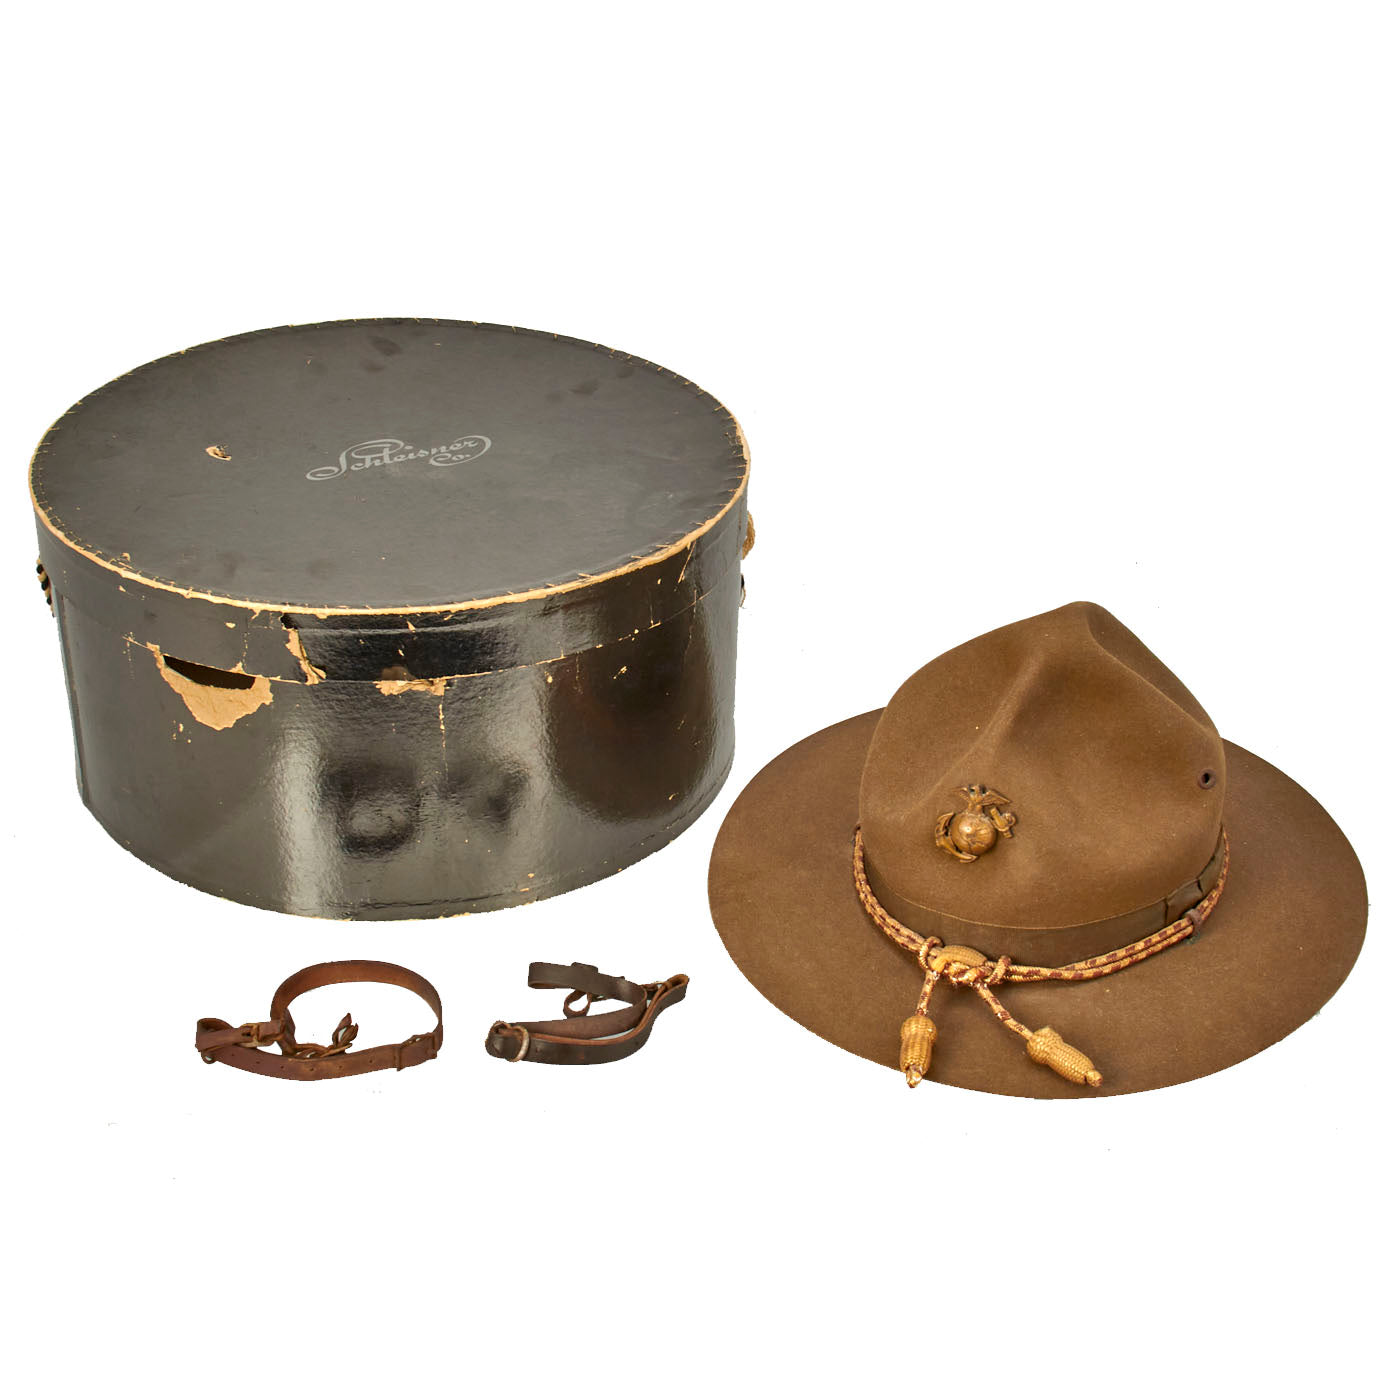 Hat Box American Heritage Since 1865 by Stetson - 12,95 £